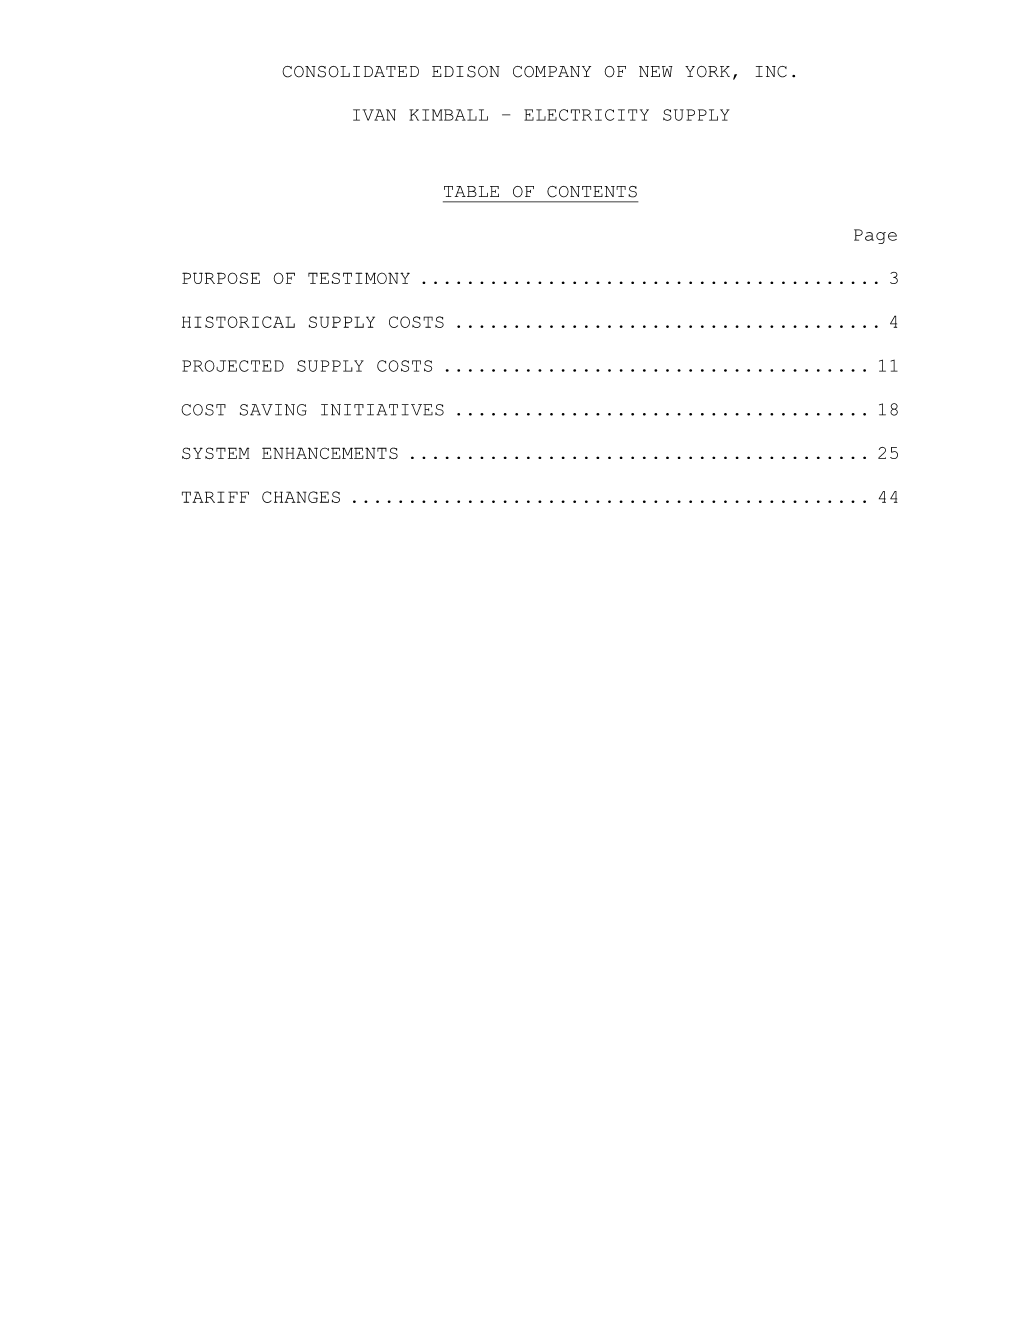 CONSOLIDATED EDISON COMPANY of NEW YORK, INC. IVAN KIMBALL – ELECTRICITY SUPPLY TABLE of CONTENTS Page PURPOSE of TESTIMONY